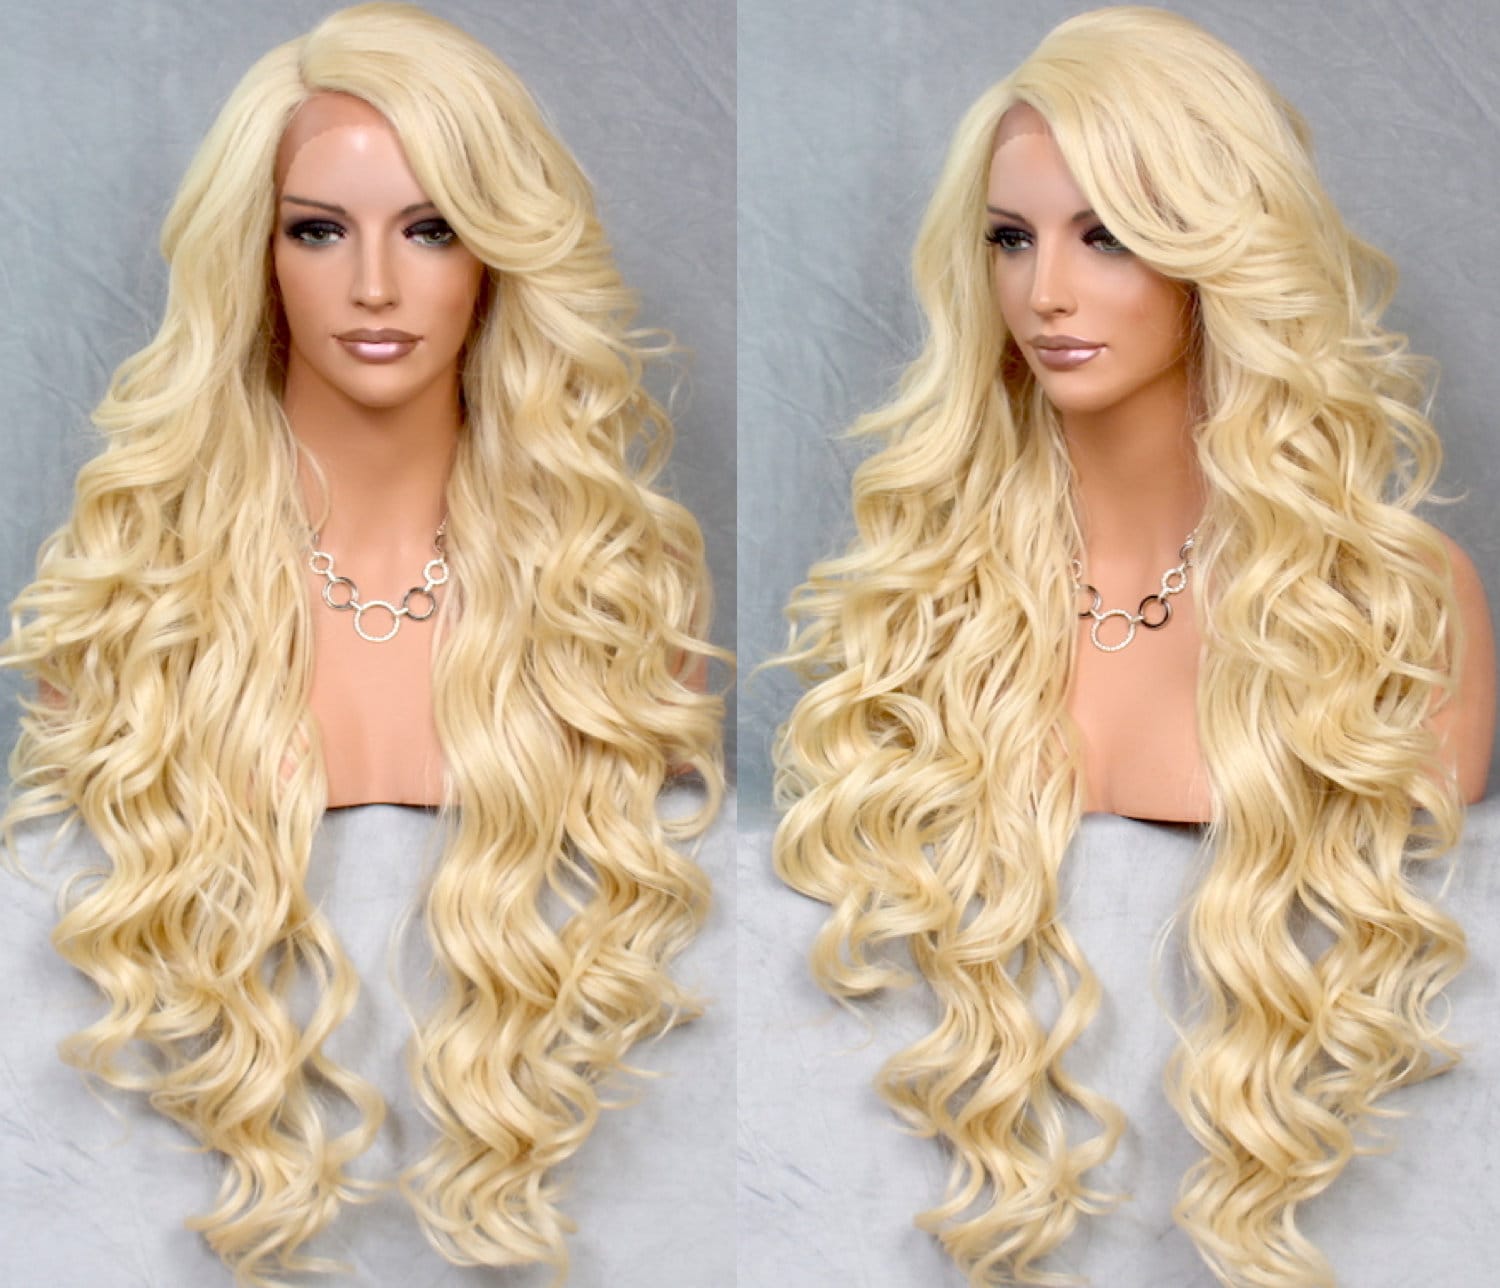 Extra Long Human Hair Blend Lace Front Wig 38 Curly Bleached Blonde Heat Safe Cancer/Alopecia/Theater/Cosplay/Club